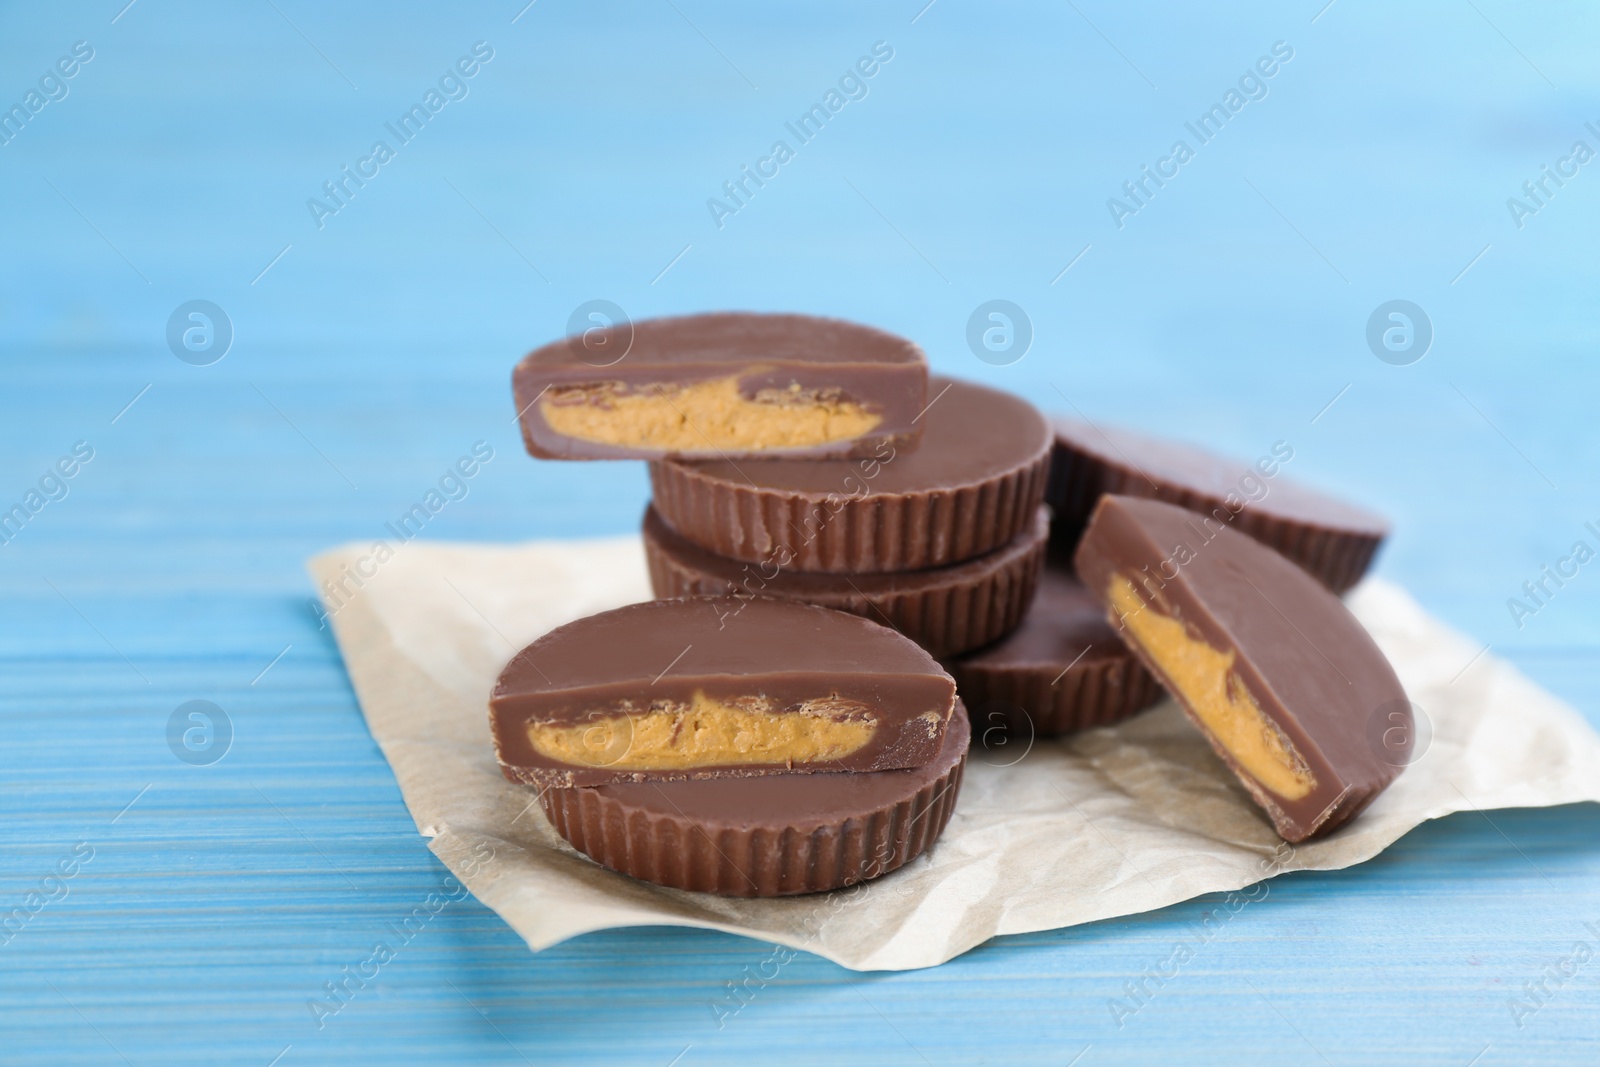 Photo of Cut and whole delicious peanut butter cups on light blue wooden table